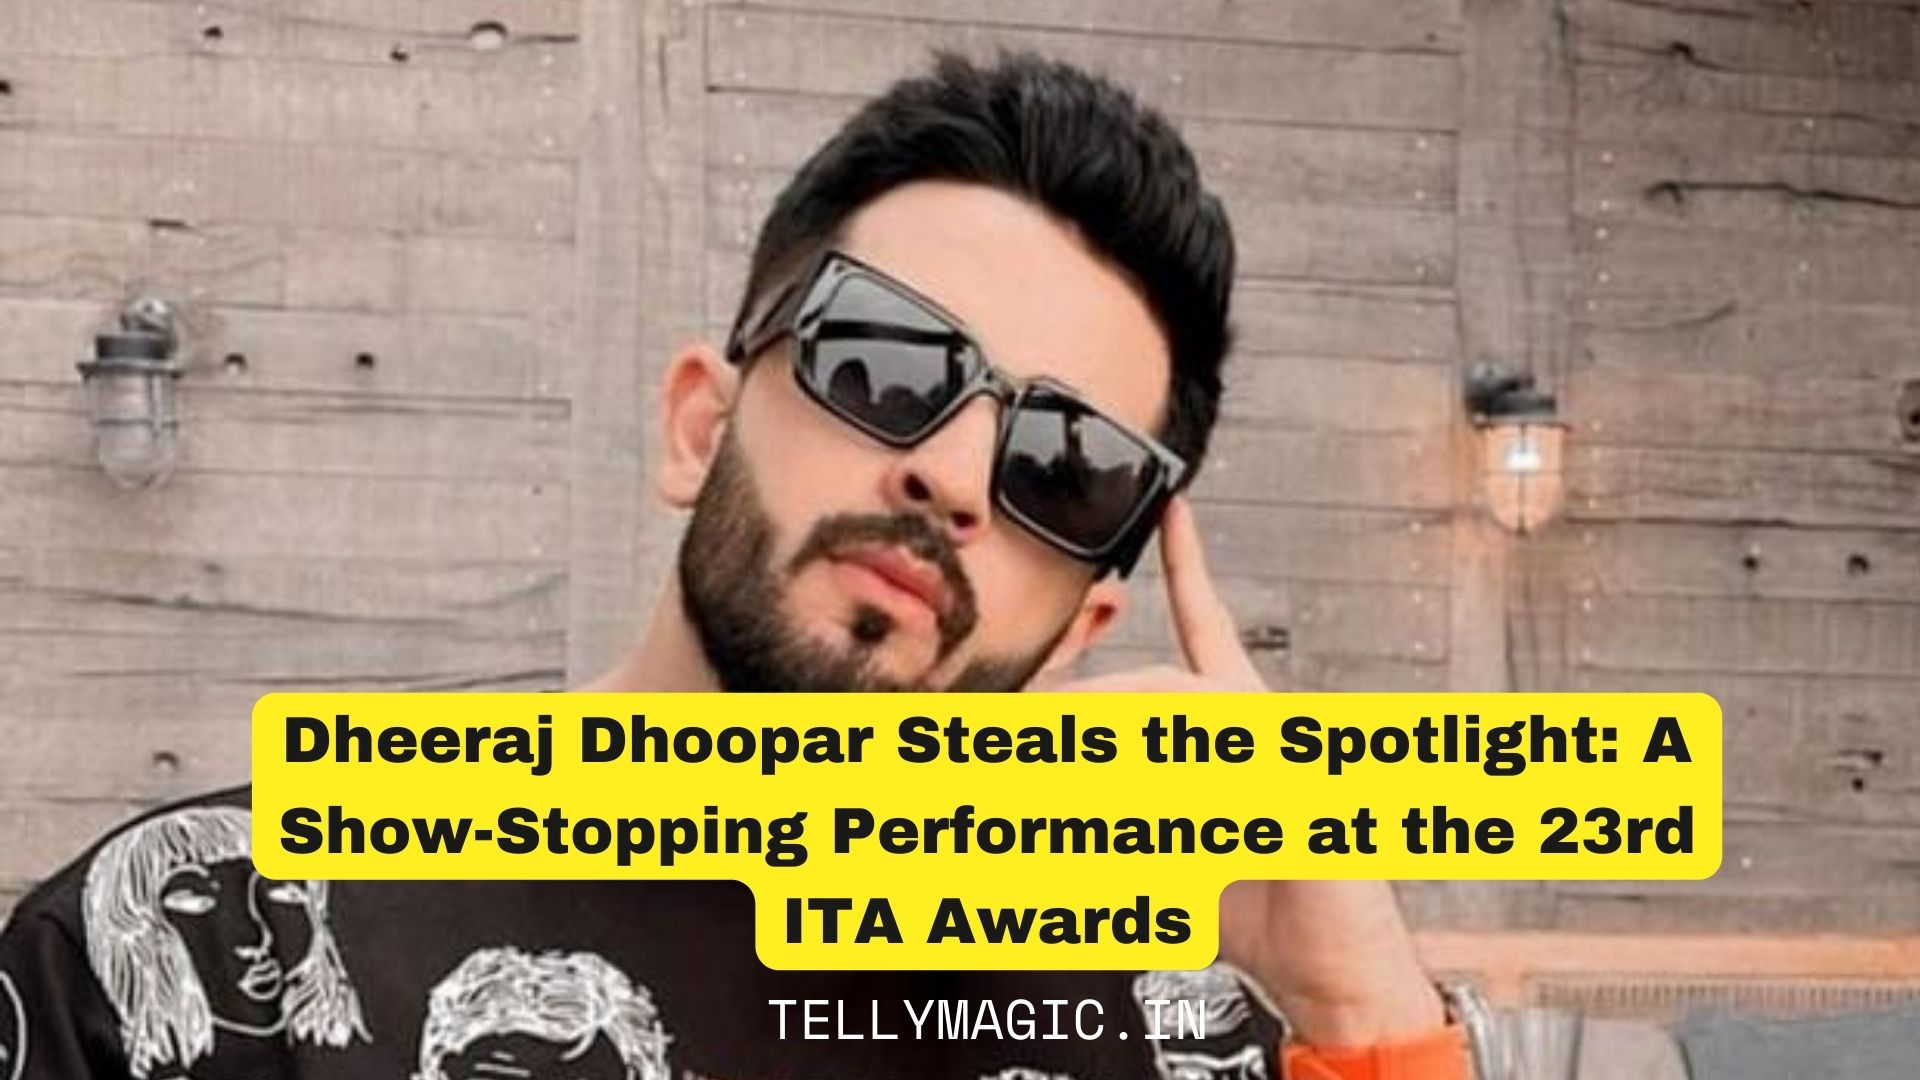 Dheeraj Dhoopar Steals the Spotlight: A Show-Stopping Performance at the 23rd ITA Awards